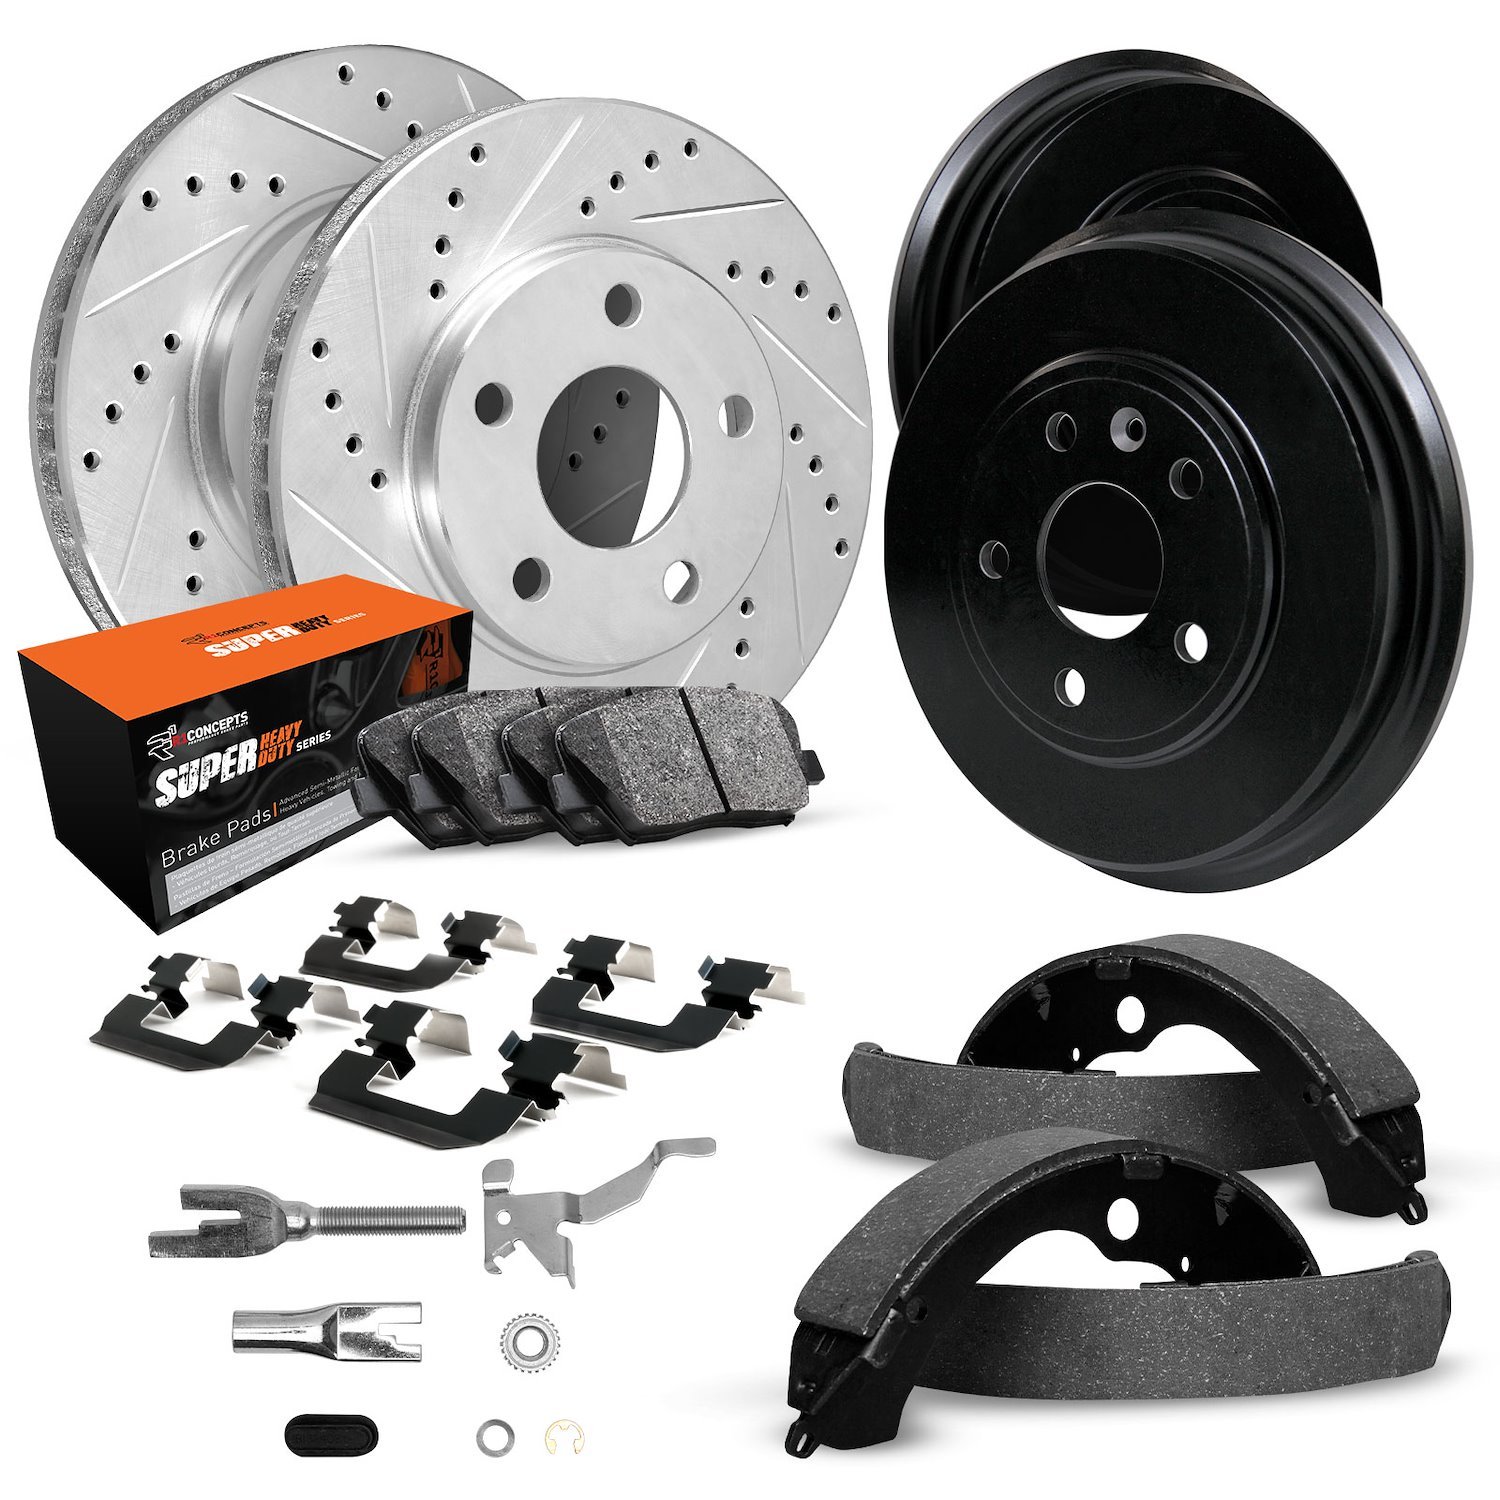 E-Line Drilled/Slotted Silver Rotor & Drum Set w/Super-Duty Pads, Shoes/Hardware/Adjusters, 1992-1994 Ford/Lincoln/Mercury/Mazda